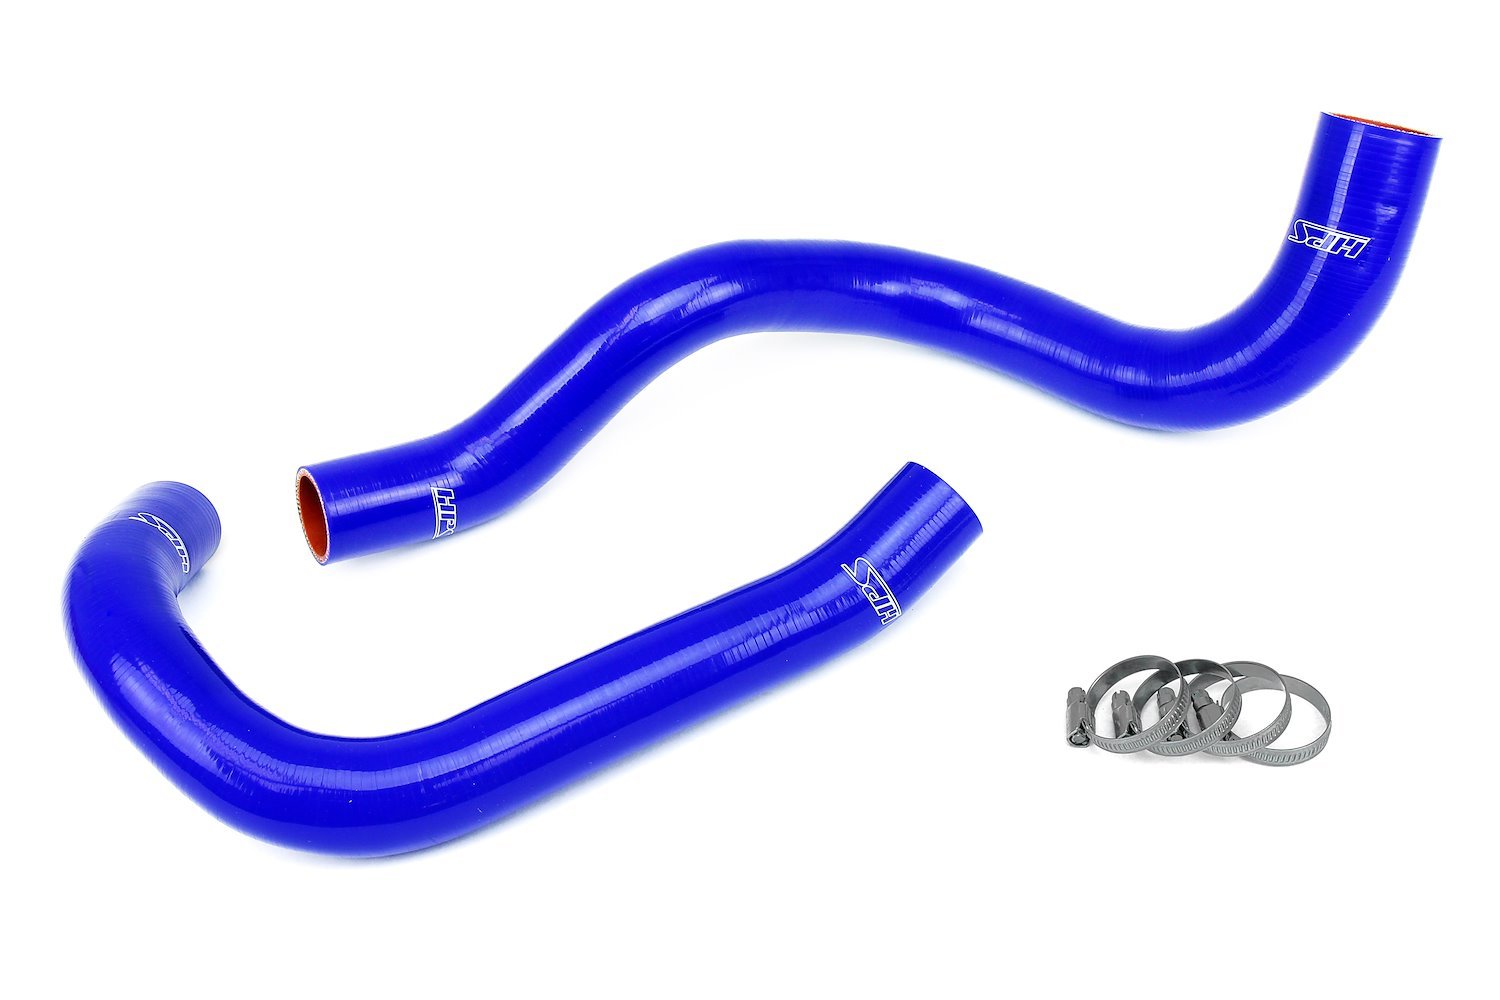 57-1834-BLUE Radiator Hose Kit, 3-Ply Reinforced Silicone, Replaces Rubber Radiator Coolant Hoses